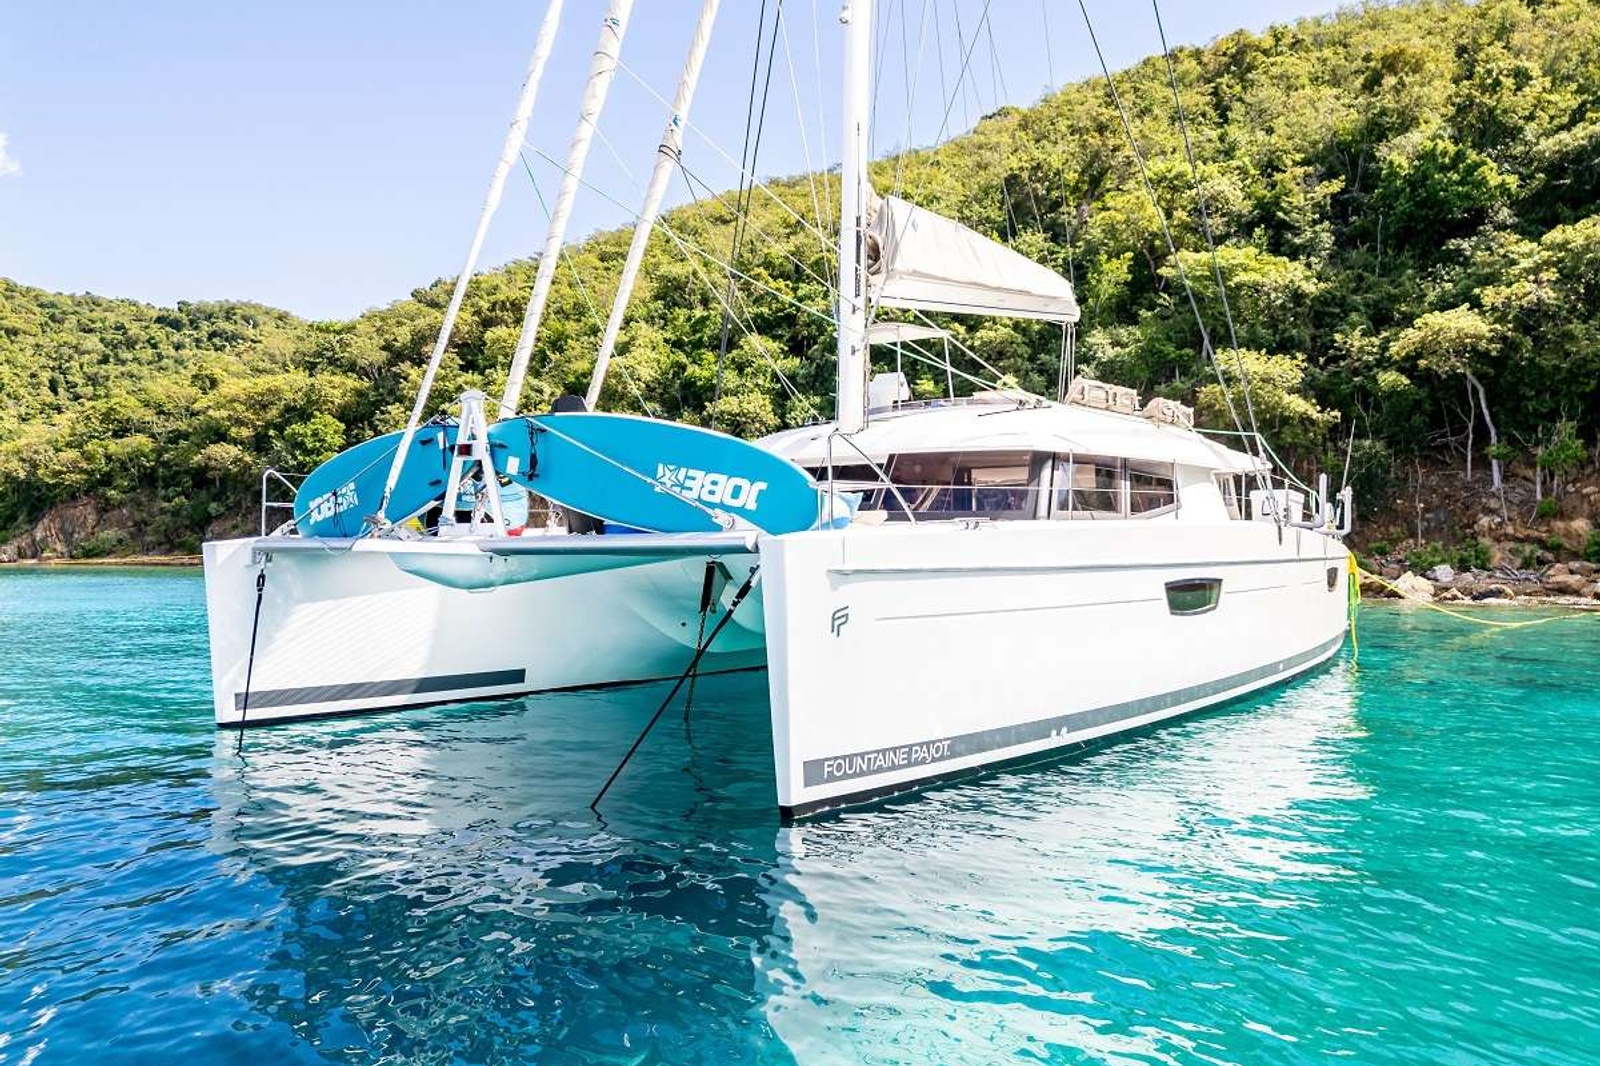 Unwind in luxury and style aboard this stunning 2018 Fountain Pajot sailing catamaran, meticulously crafted to accommodate up to 8 guests on a luxurious 58ft catamaran

Step into the primary cabin, where a plush king-size bed awaits, complemented by a spacious work desk and a cozy lounge area, perfect for unwinding after a day of adventure.

Three additional well-appointed cabins offer ample space and comfort, each boasting a queen-size berth, ensuring that every guest can retreat to their own private sanctuary.

Embark on unforgettable voyages, surrounded by breathtaking scenery and the tranquility of the open seas, aboard this exceptional catamaran.